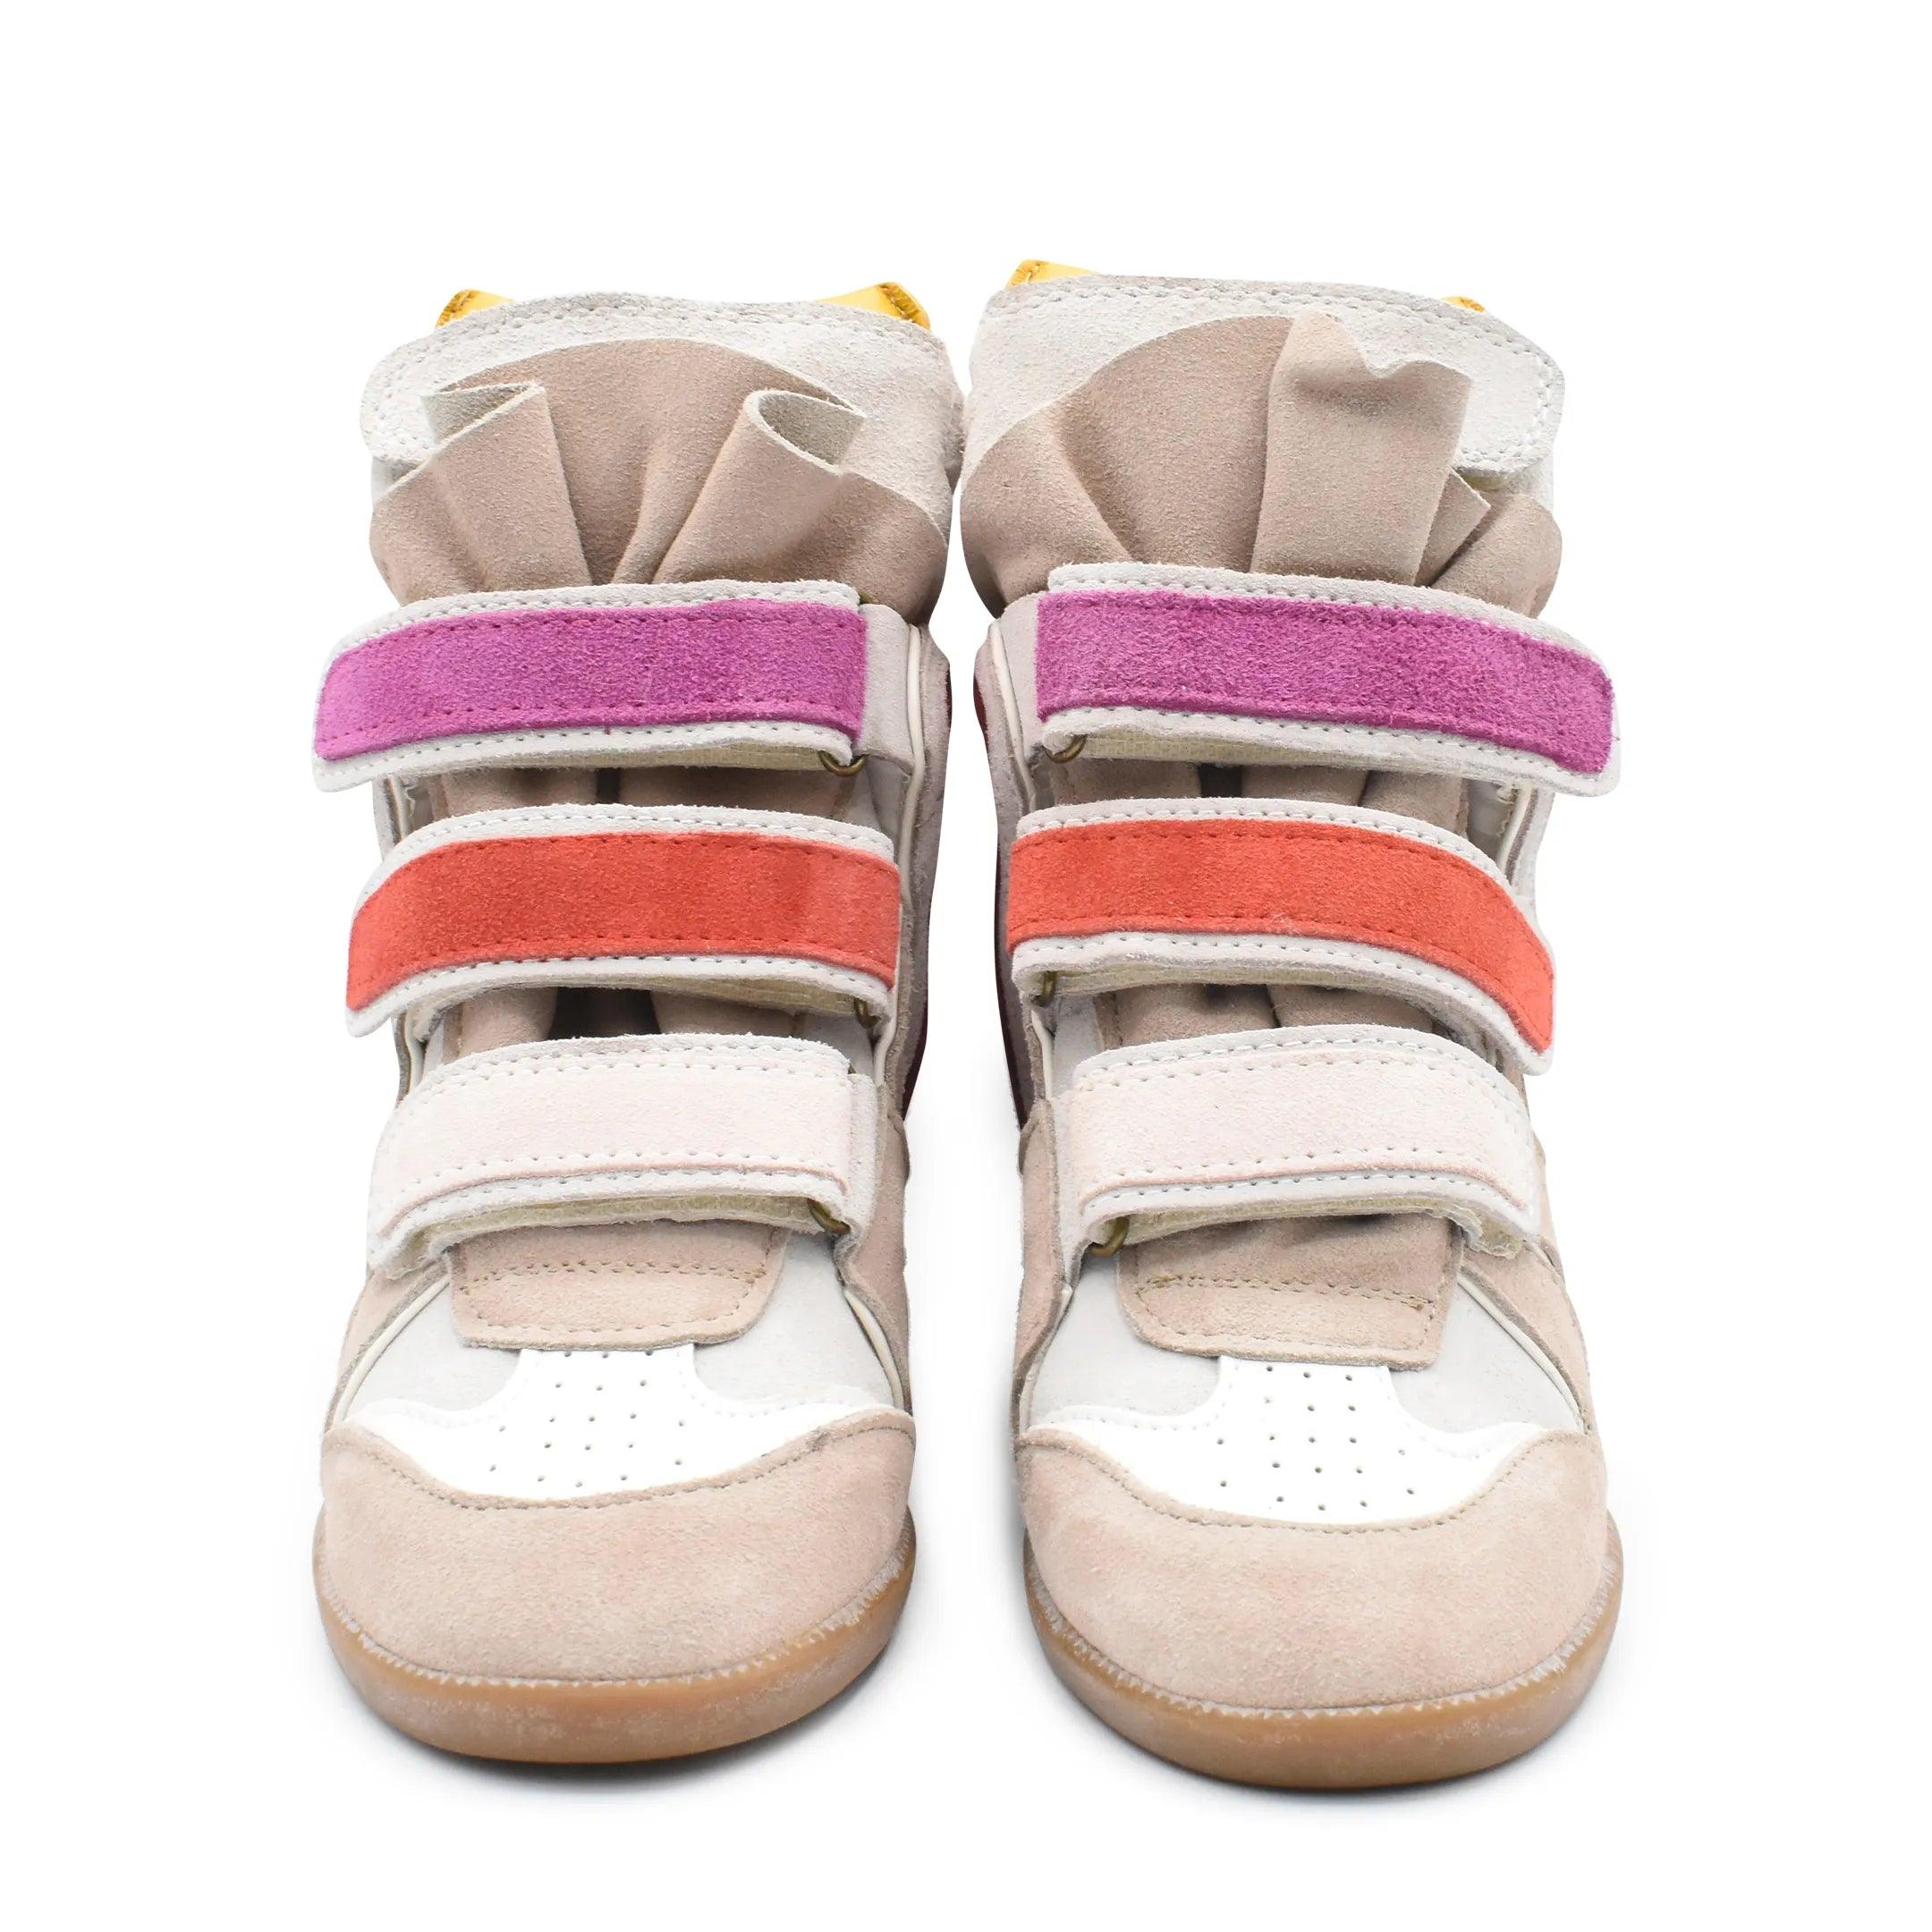 Isabel Marant Wedge Sneakers - Women's 36 - Fashionably Yours